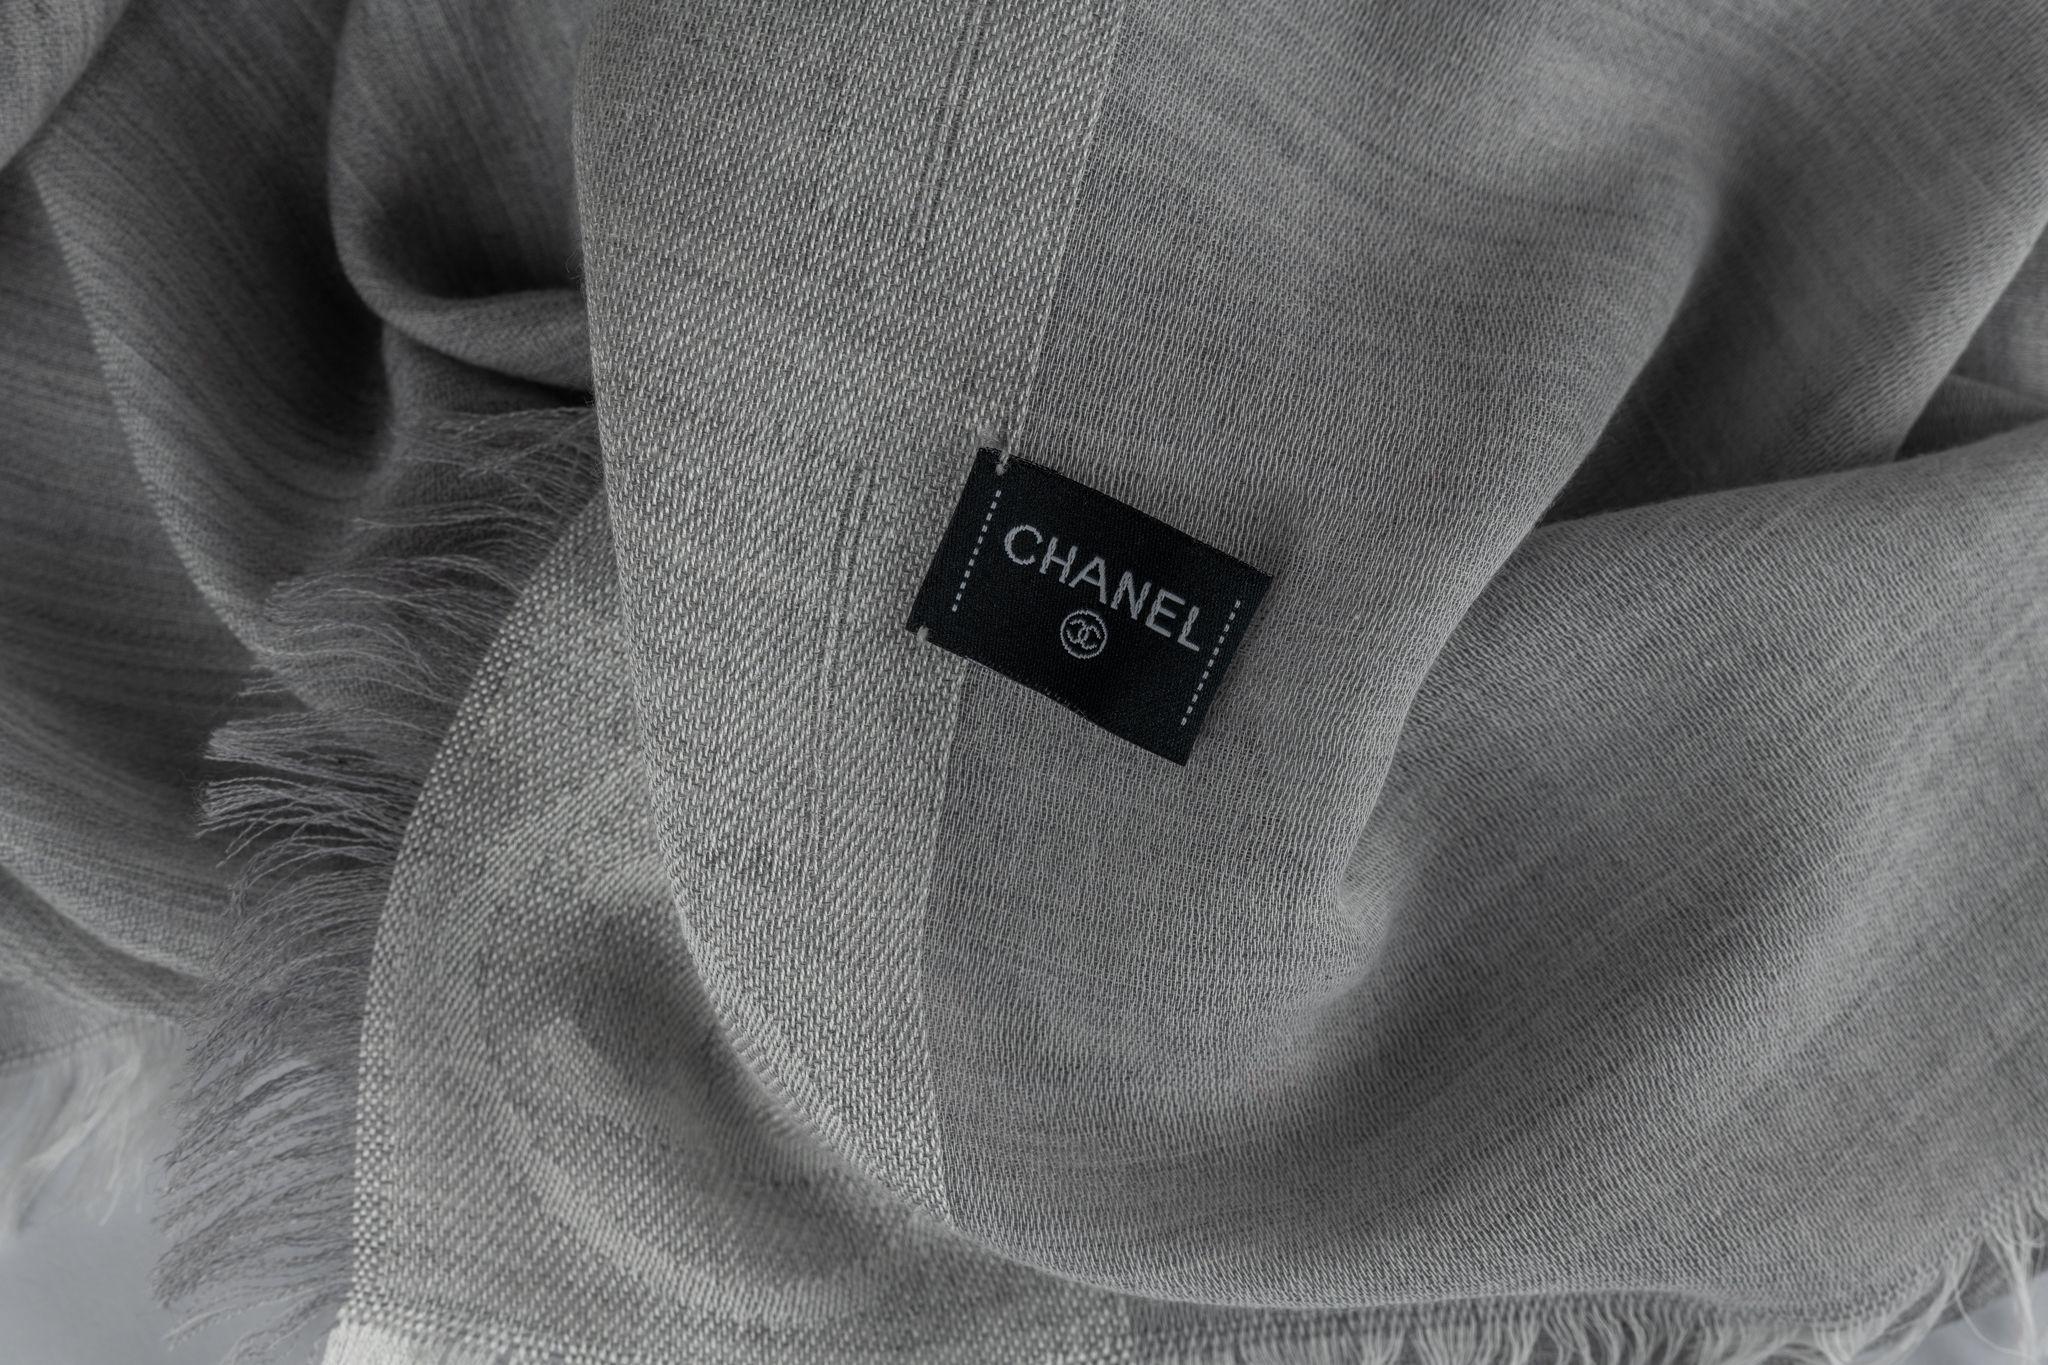 Chanel new grey shawl with white fringe trim. Logo design . Oversize rectangular shape. 100% cashmere .Dry clean only .